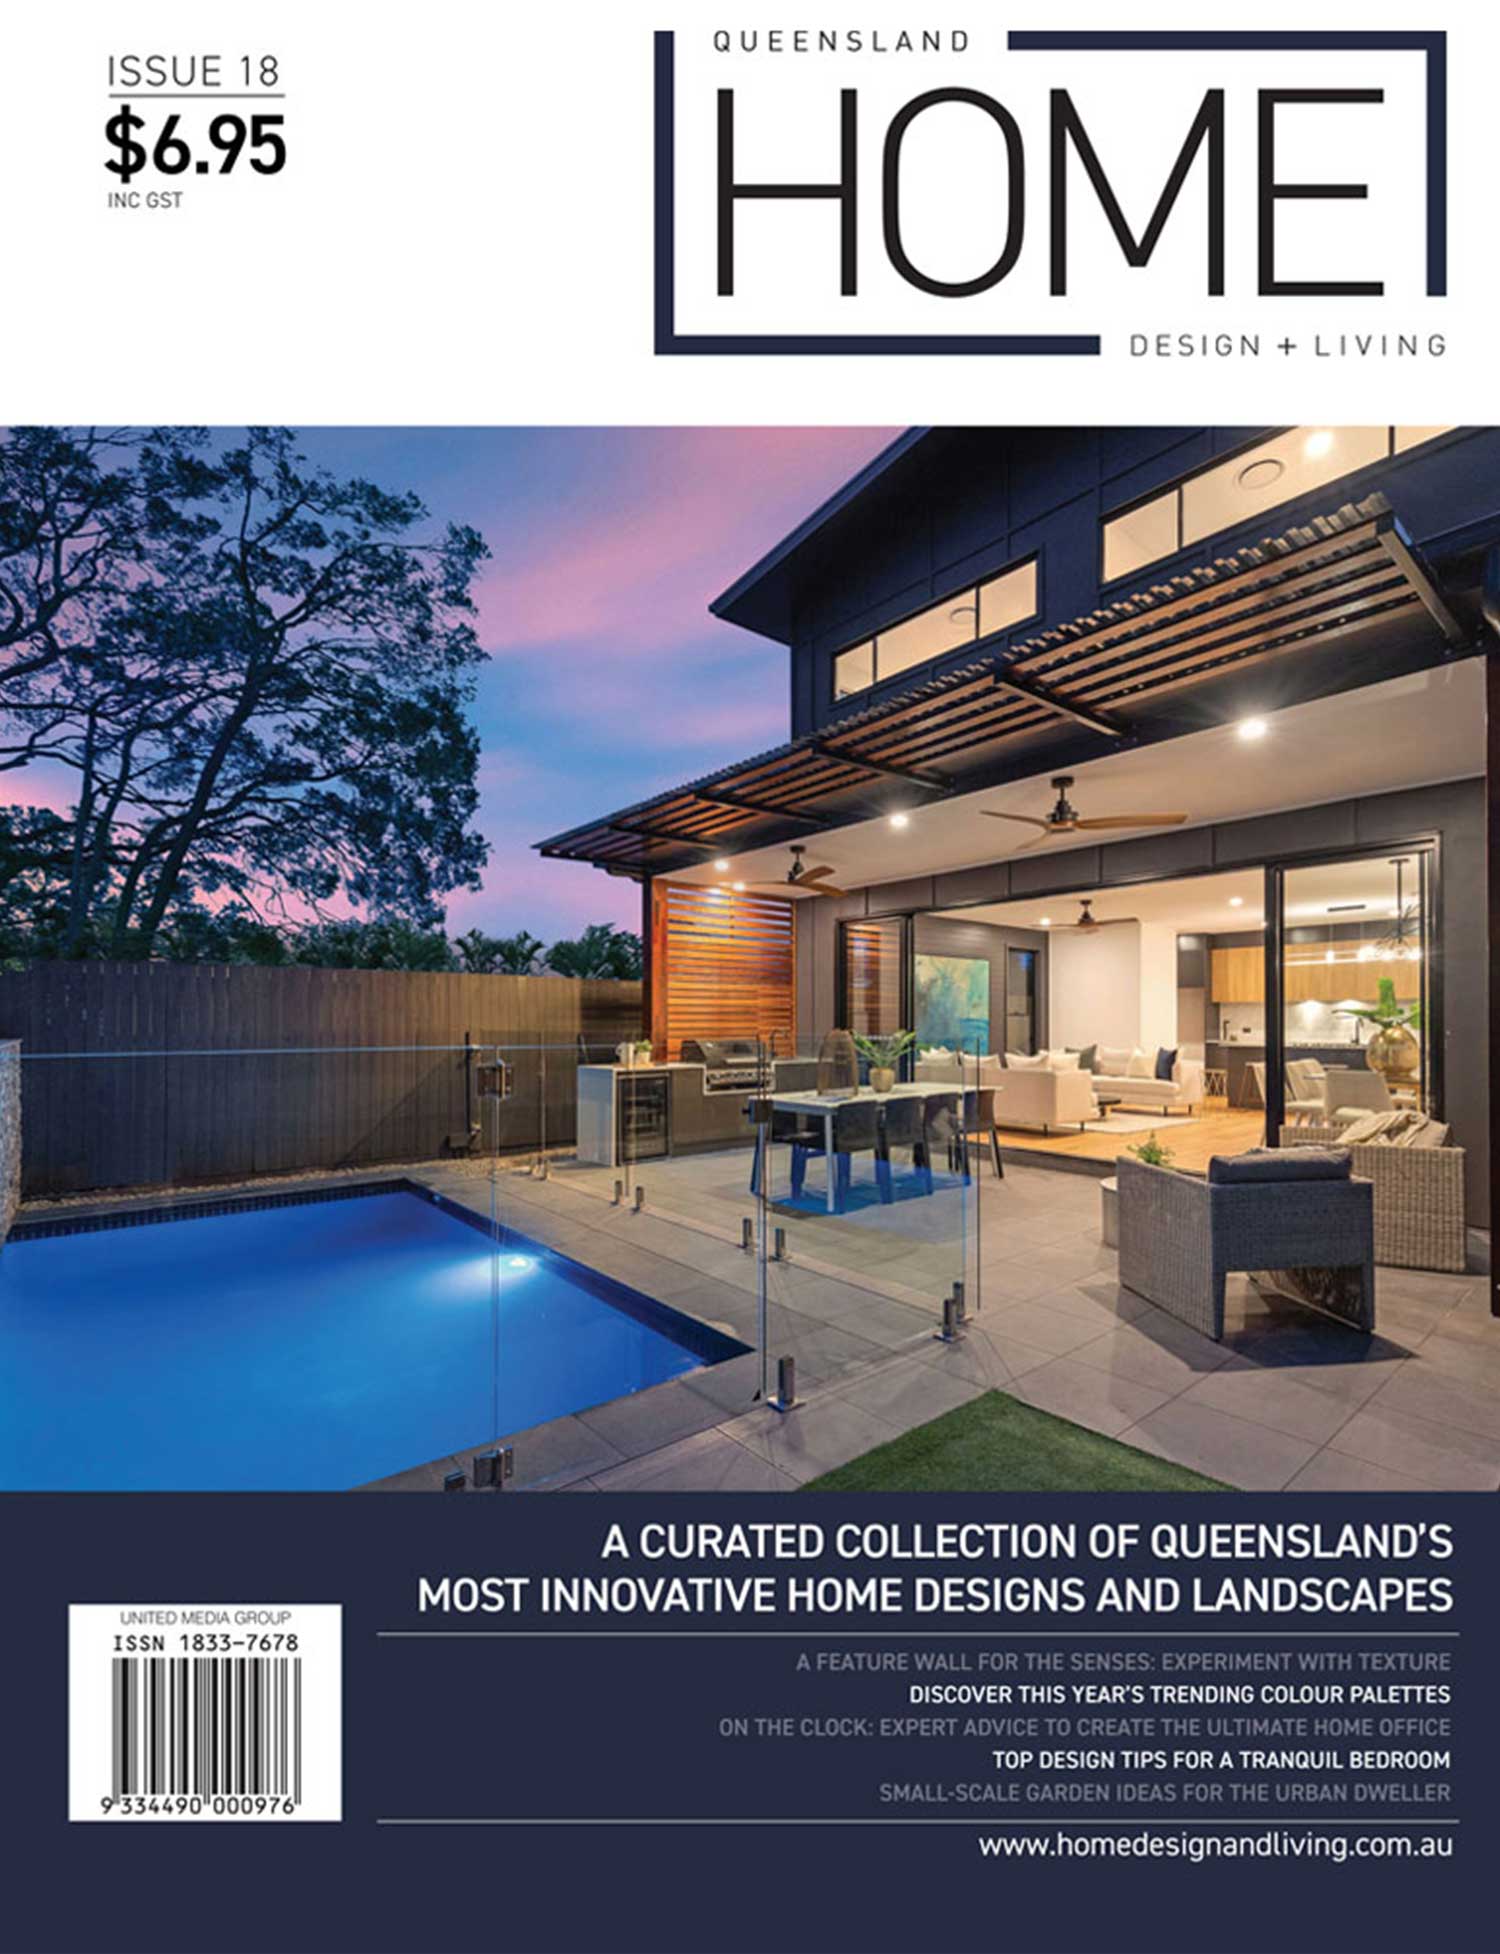 Queensland Home Design and Living